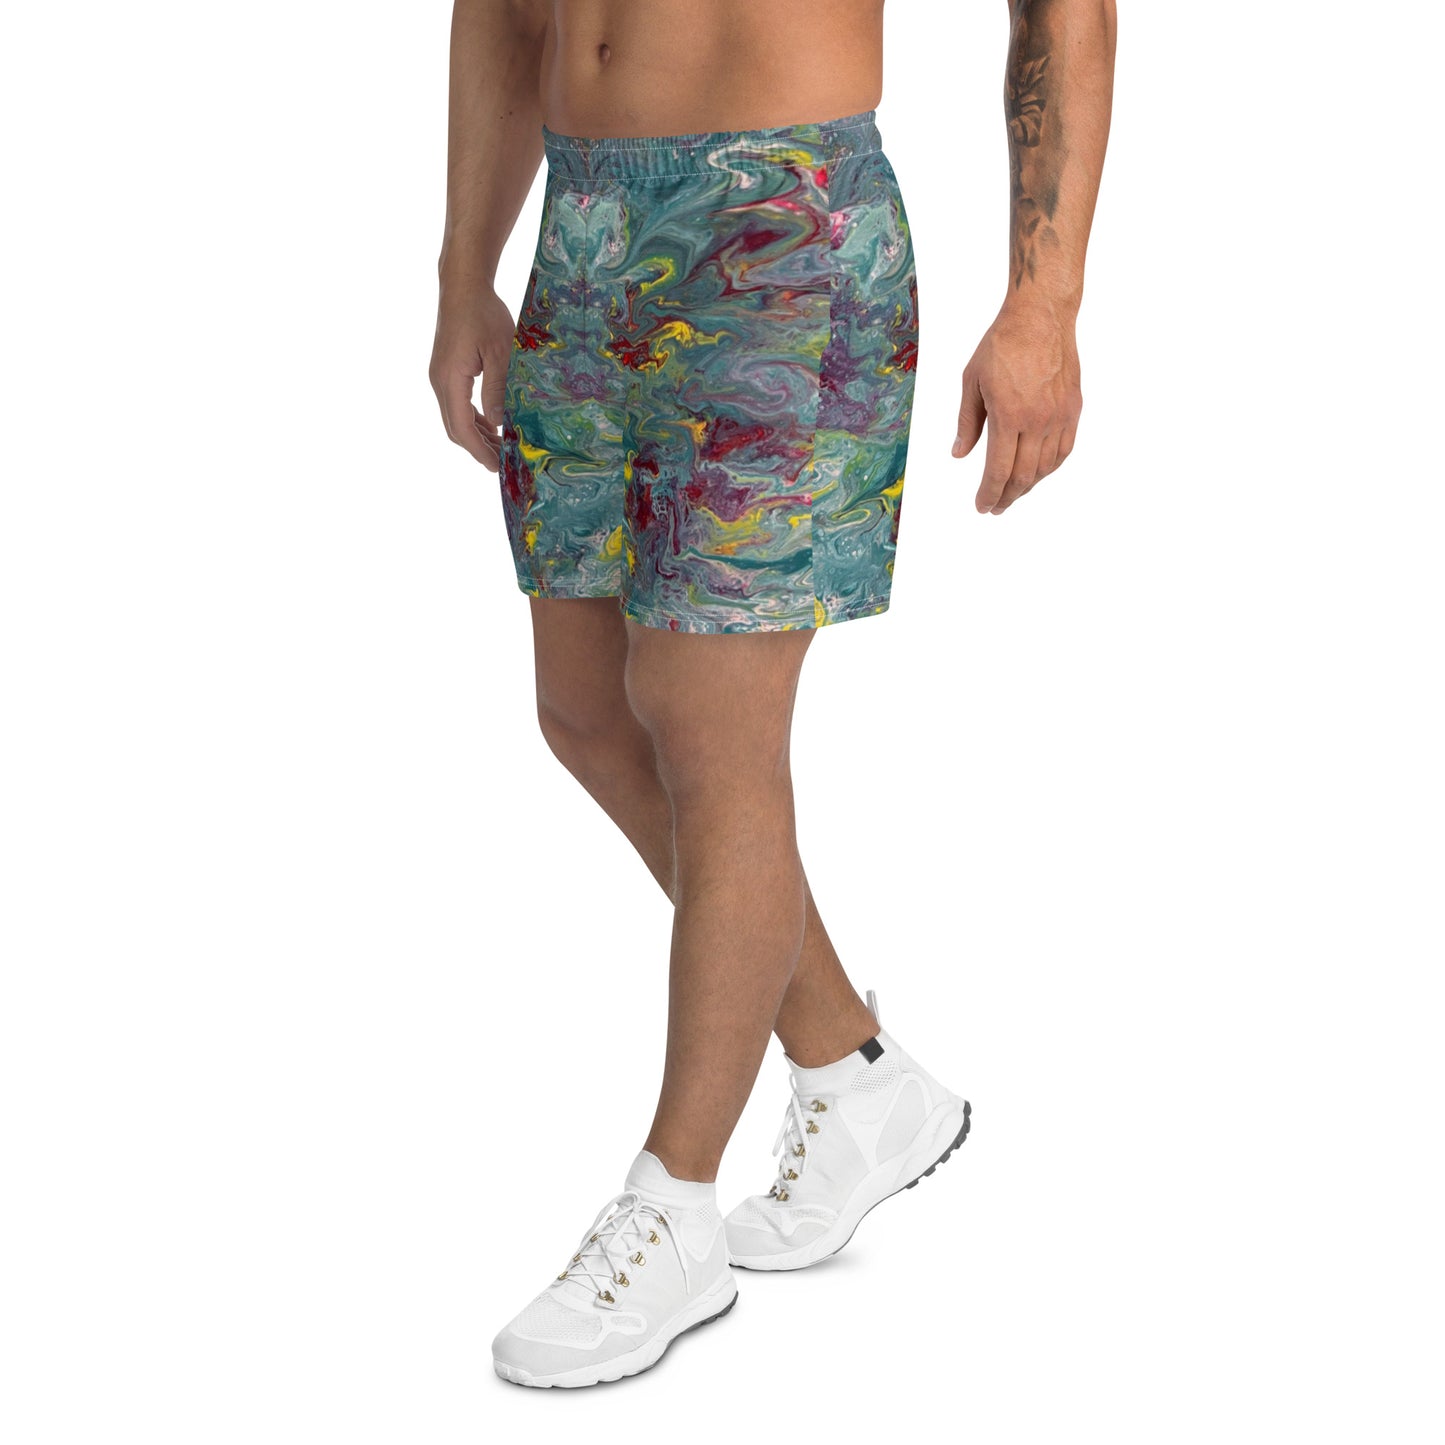 Teal Tapestry Athletic Shorts